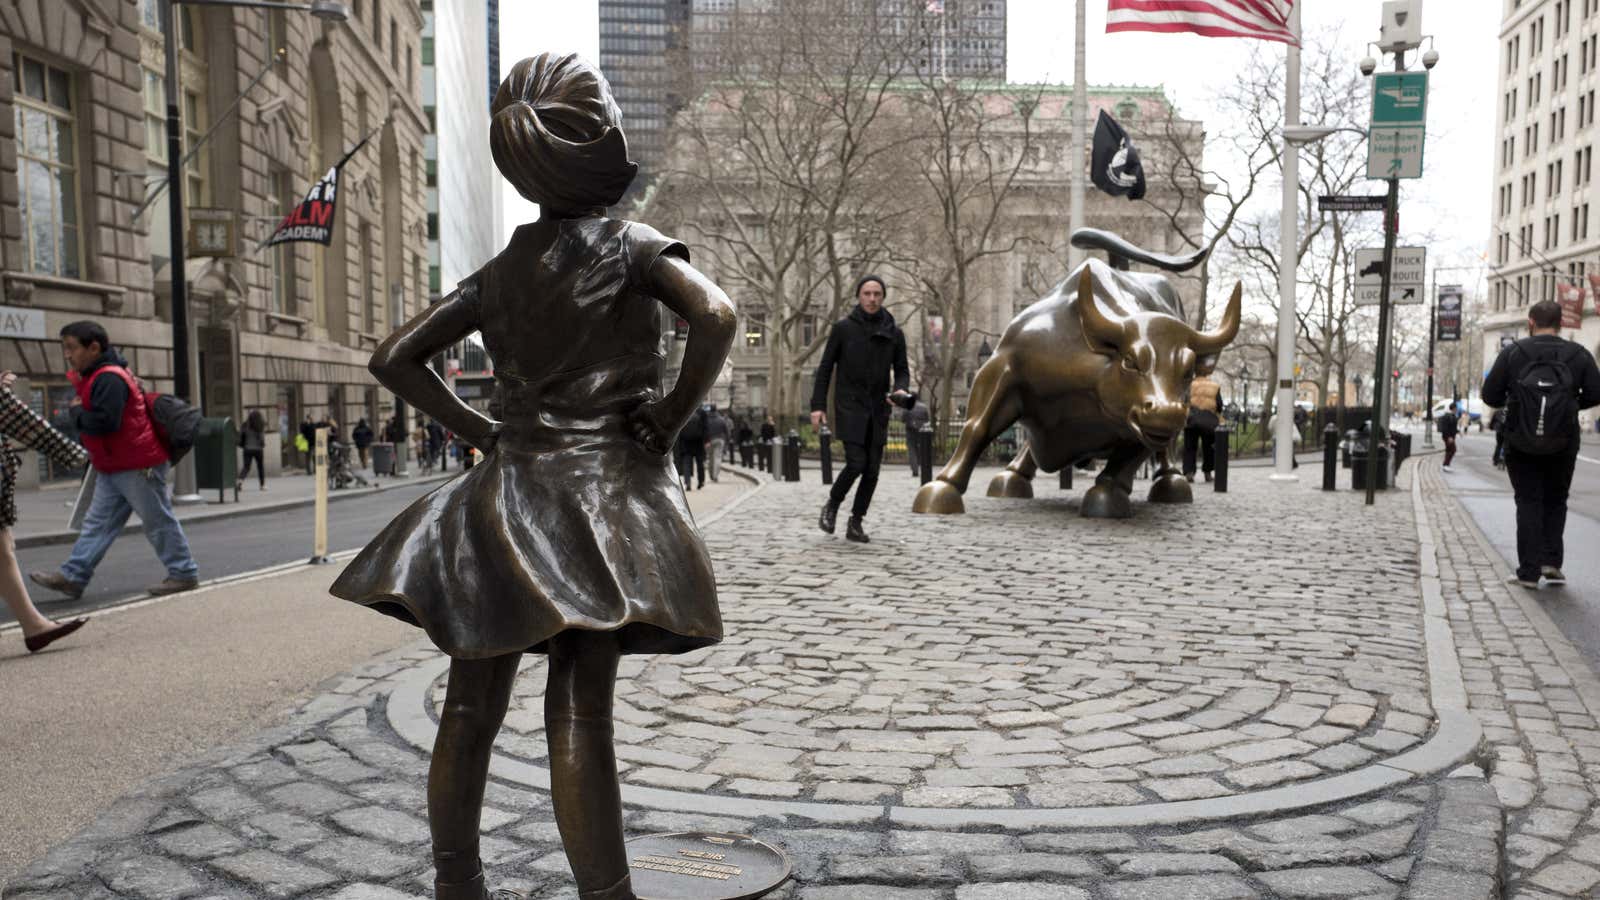 For women in finance, there’s a long way to go.